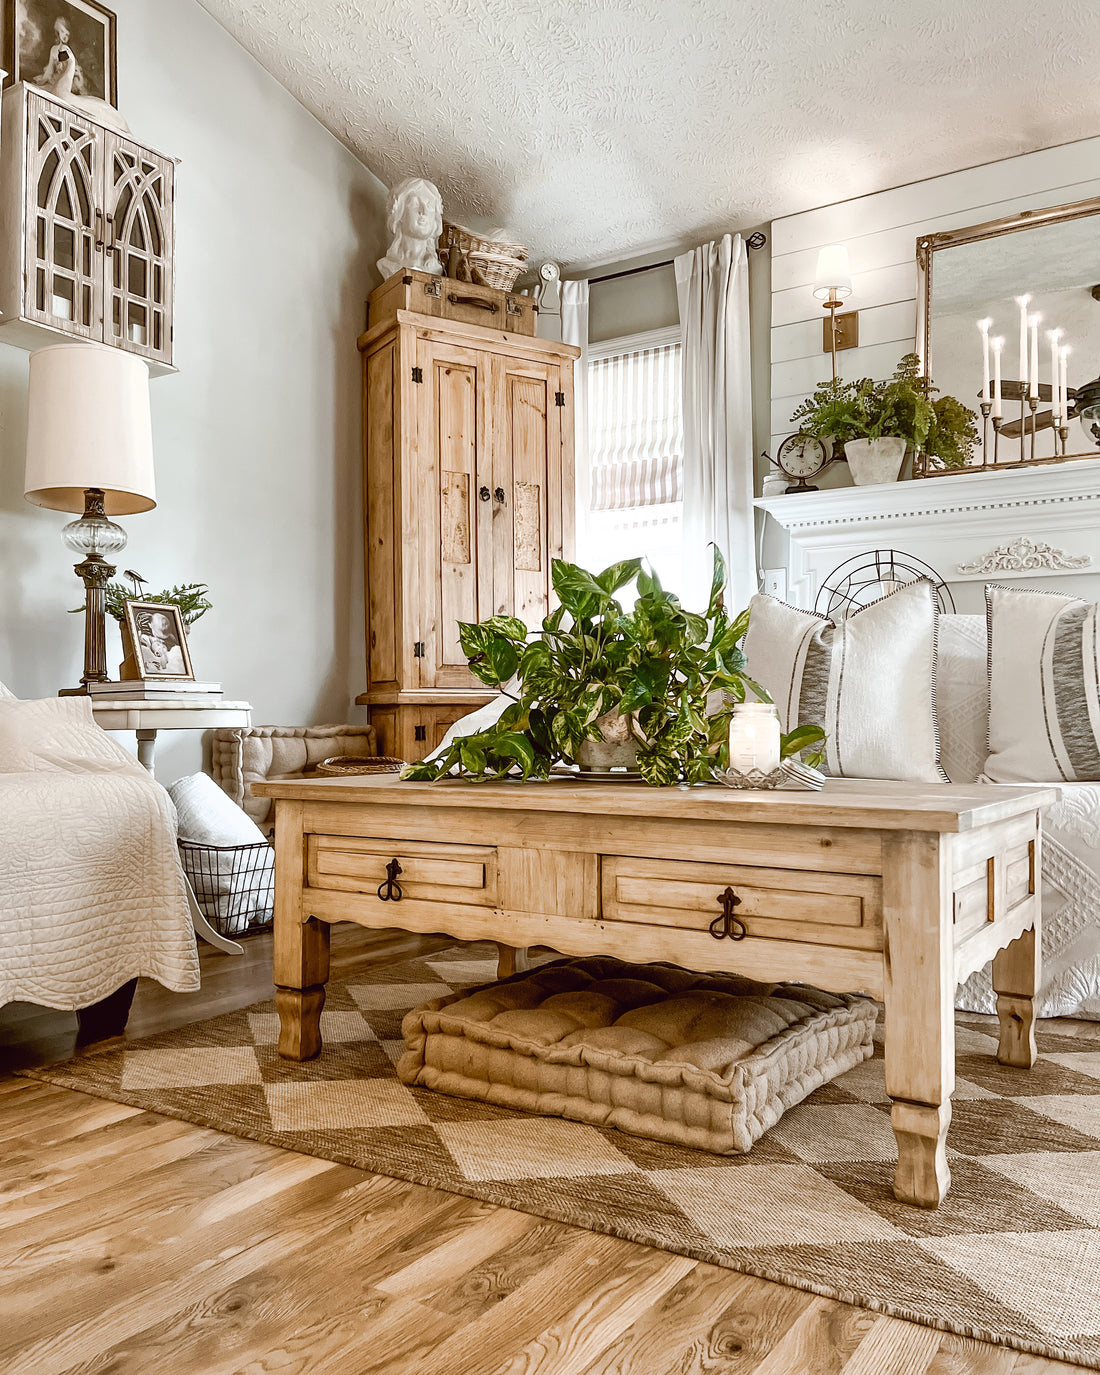 Rearranging Your Furniture for a Cozy New Vibe – Nickels Creek Mercantile